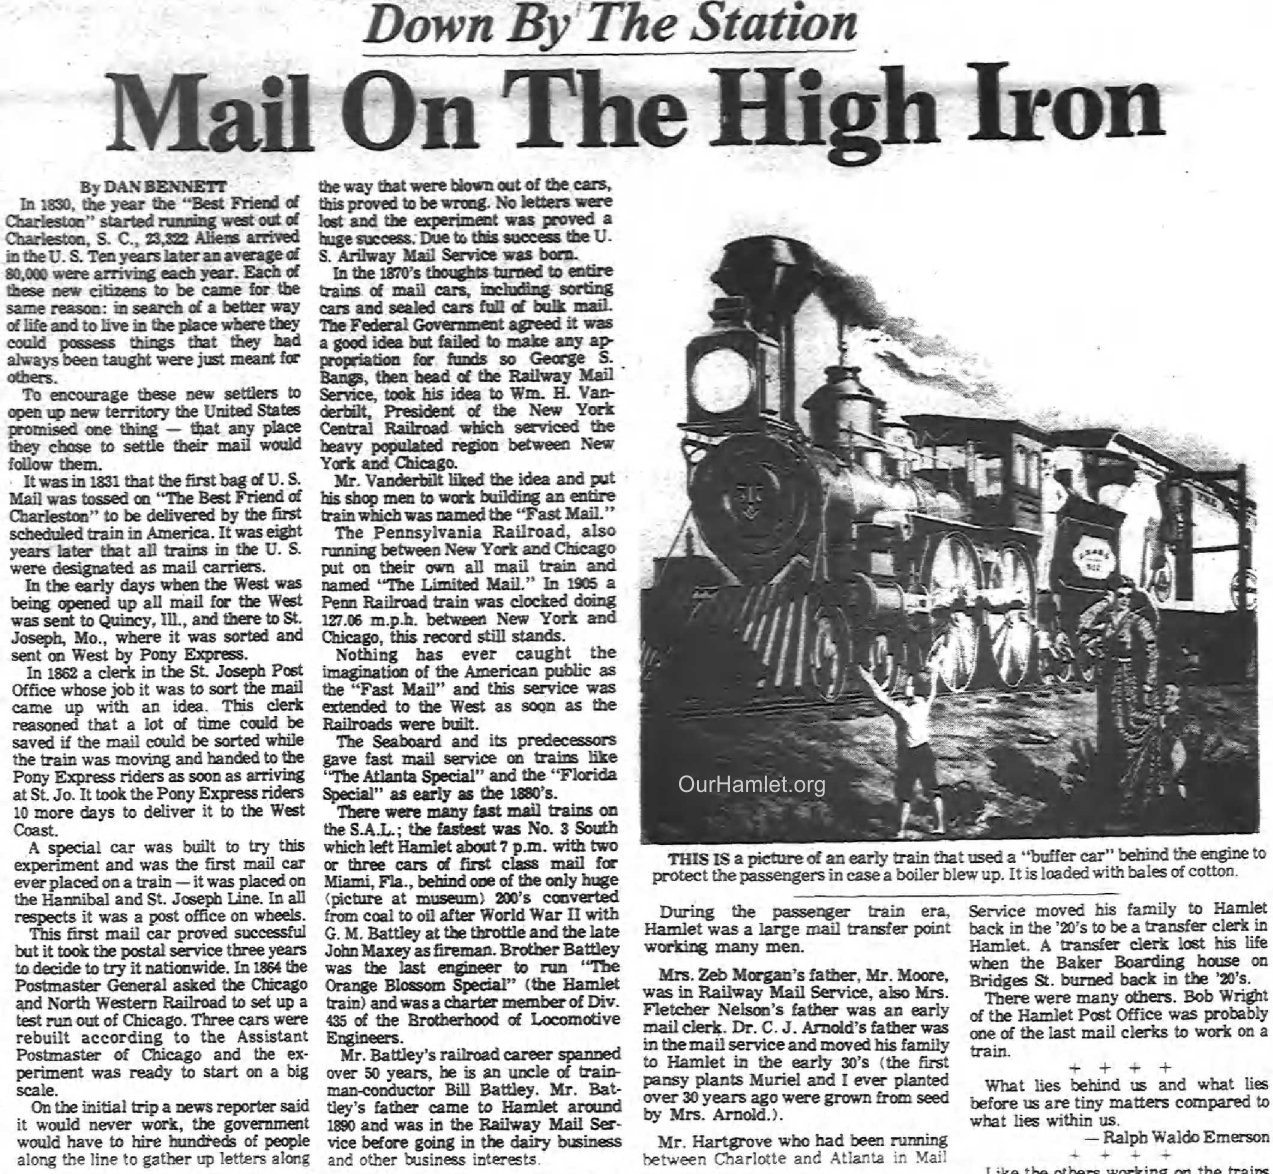 Down by the Station - Mail on the High Iron OH.jpg